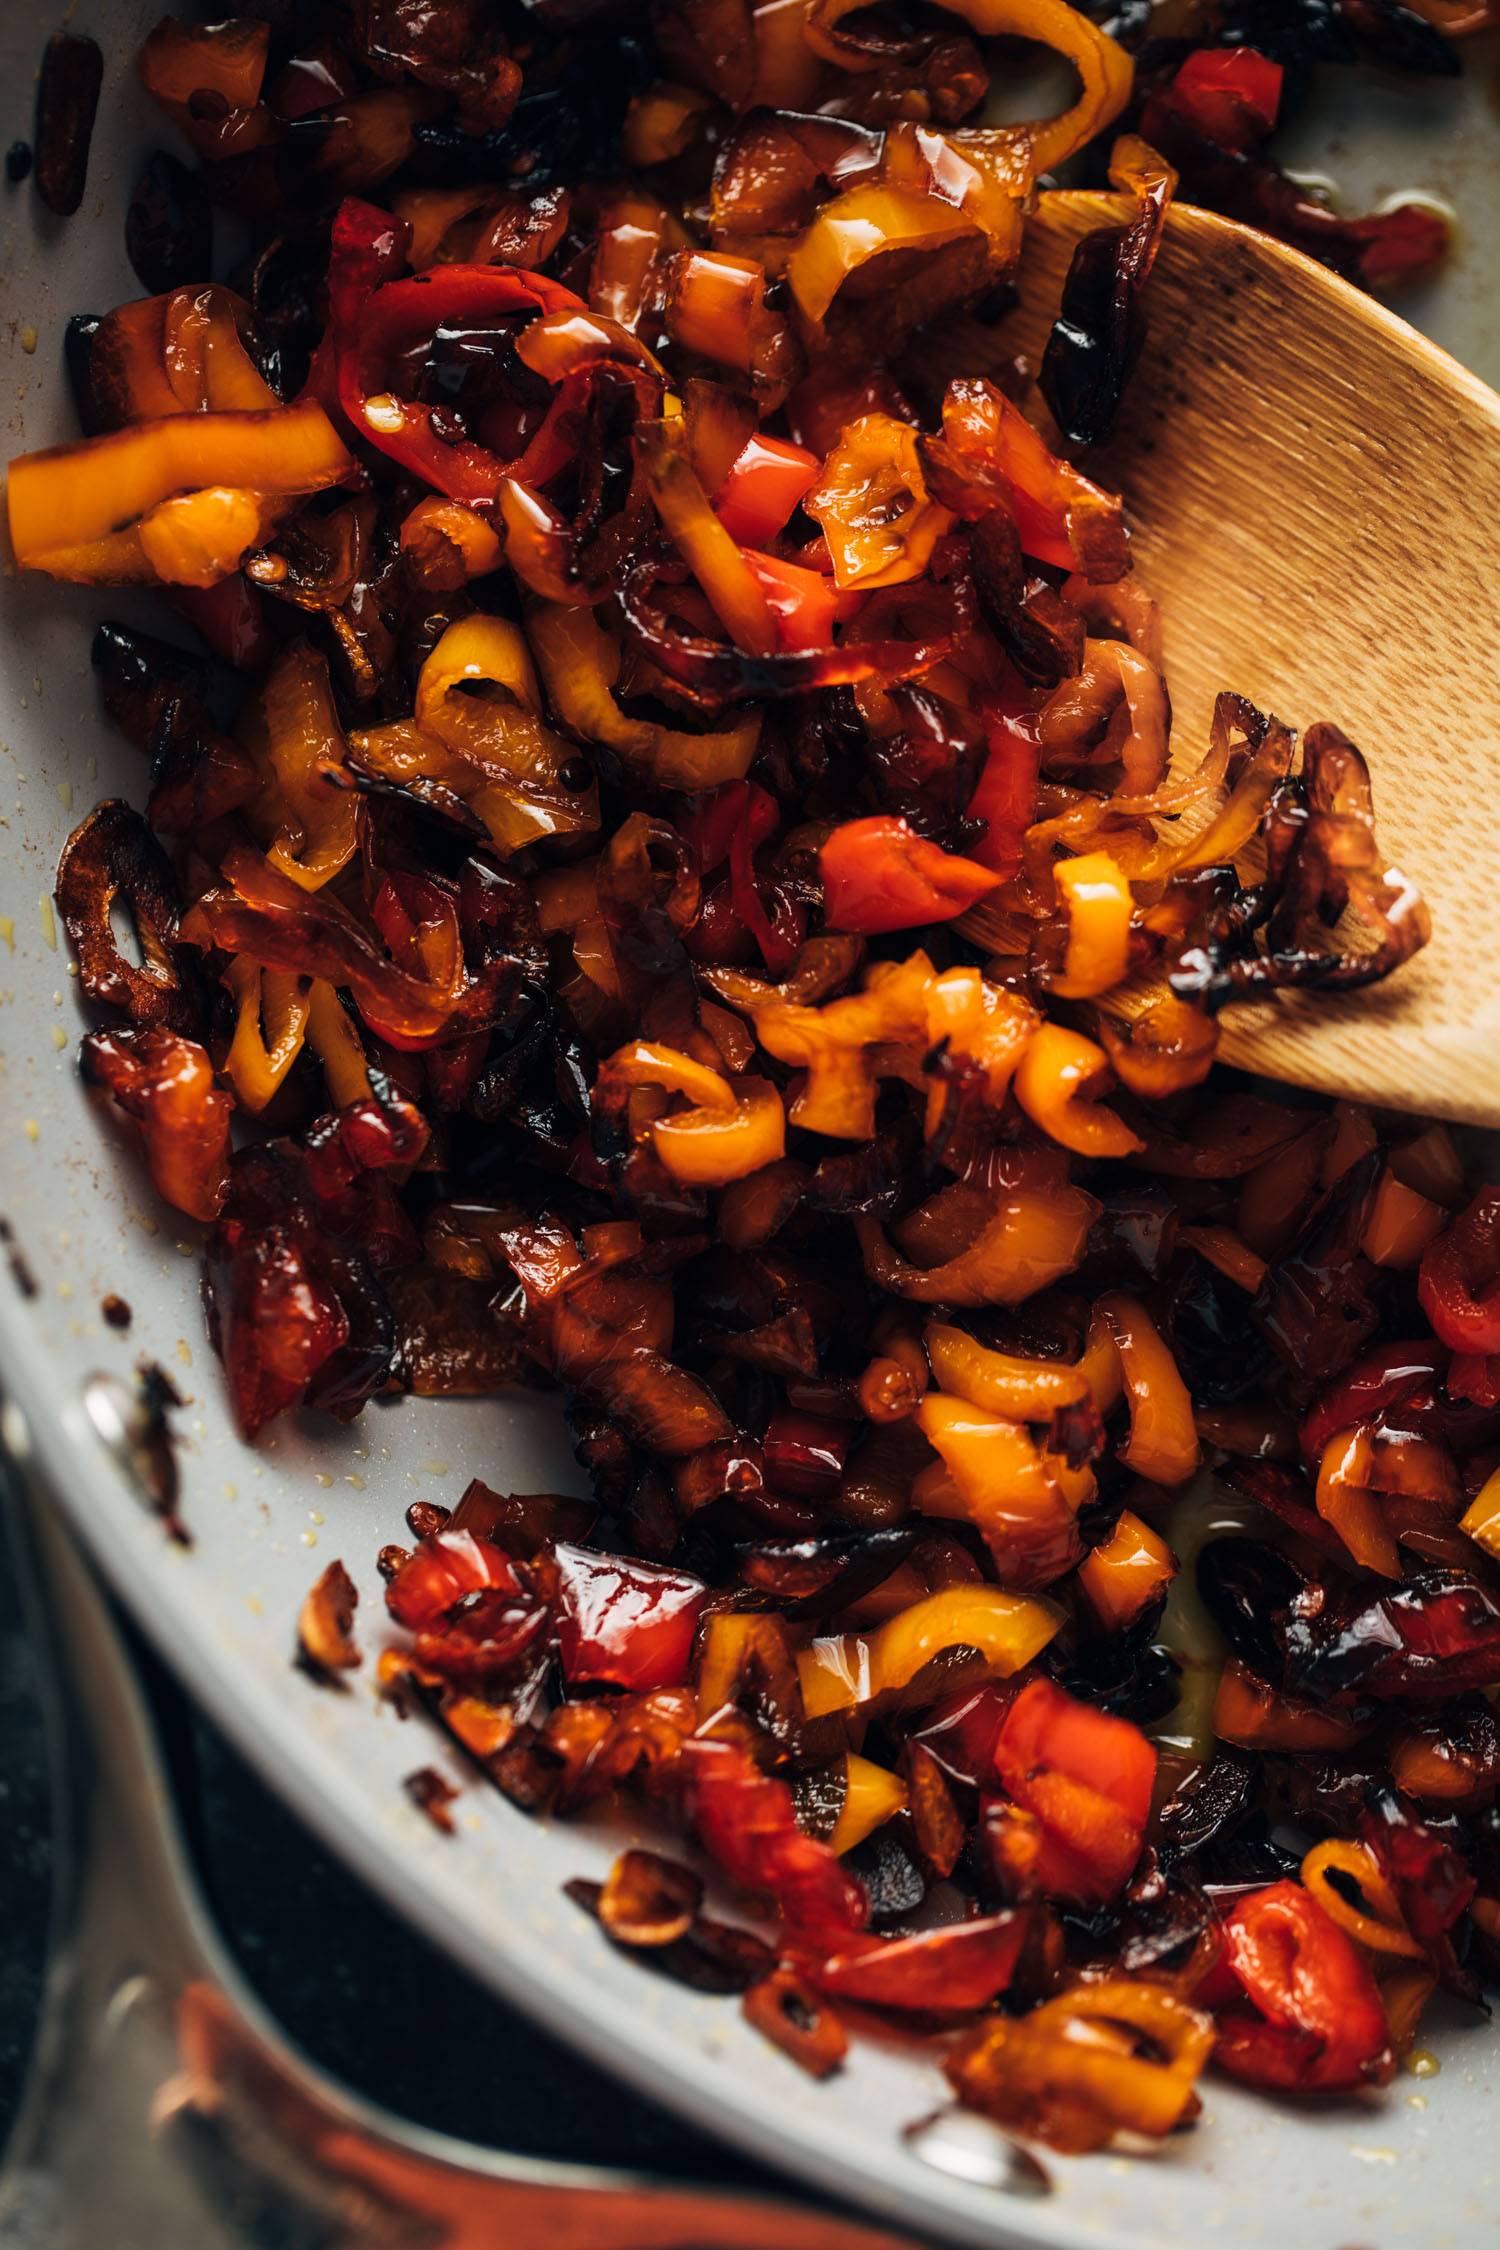 Candied peppers in a pan with a wooden spoon